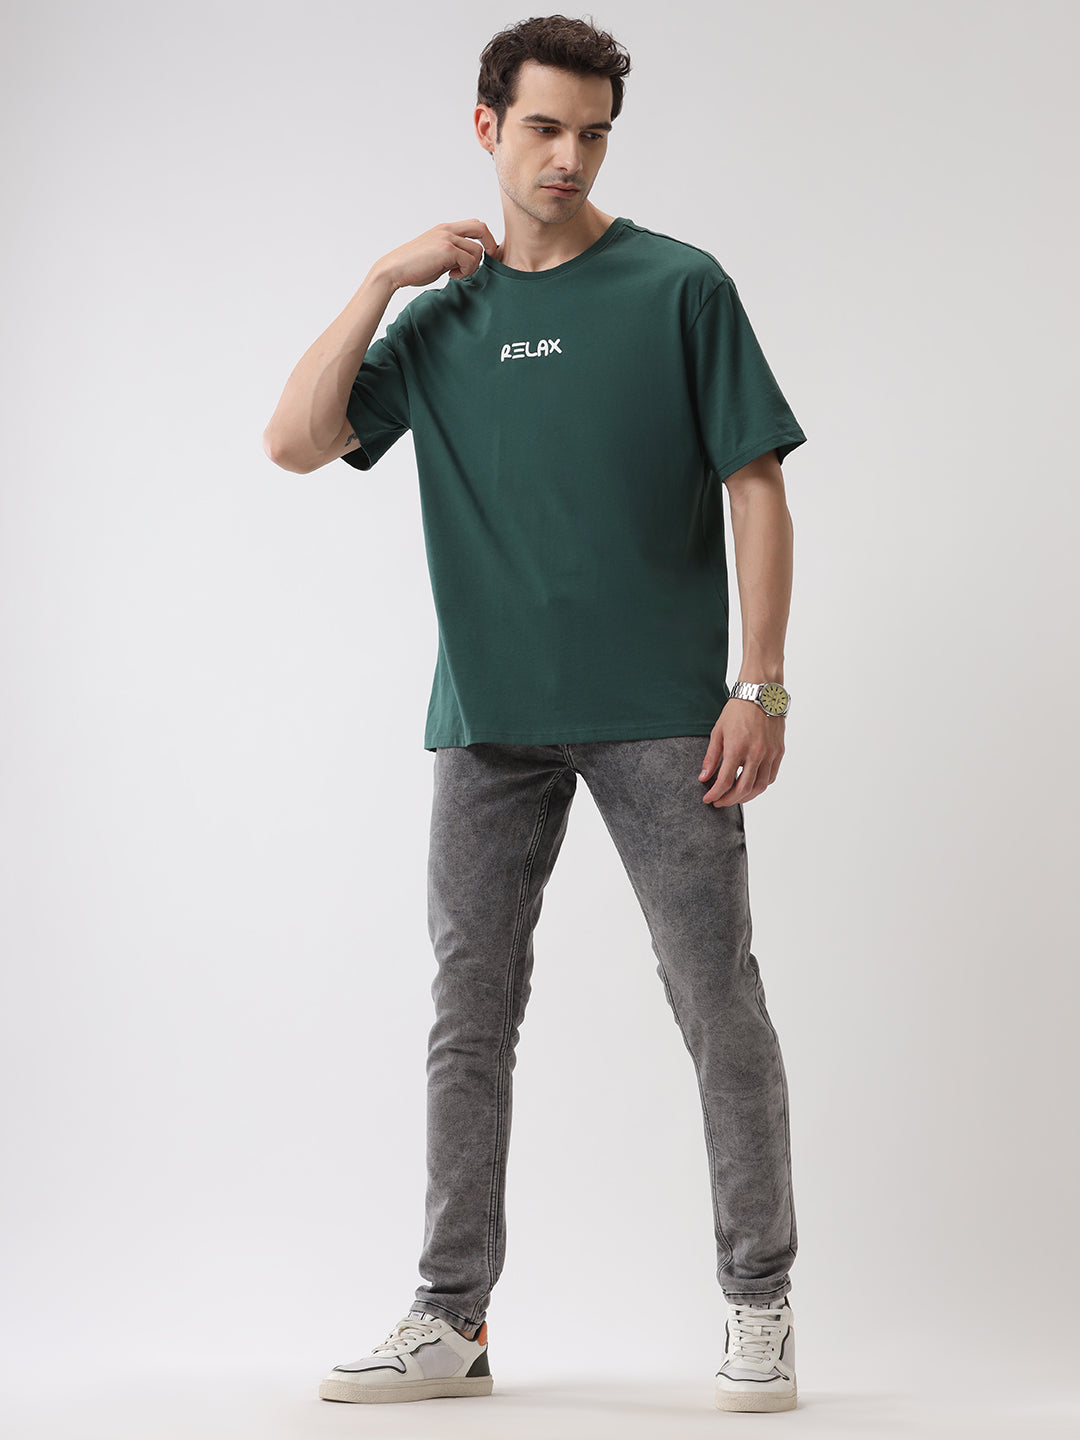 Relax Printed Green Oversized T-Shirt